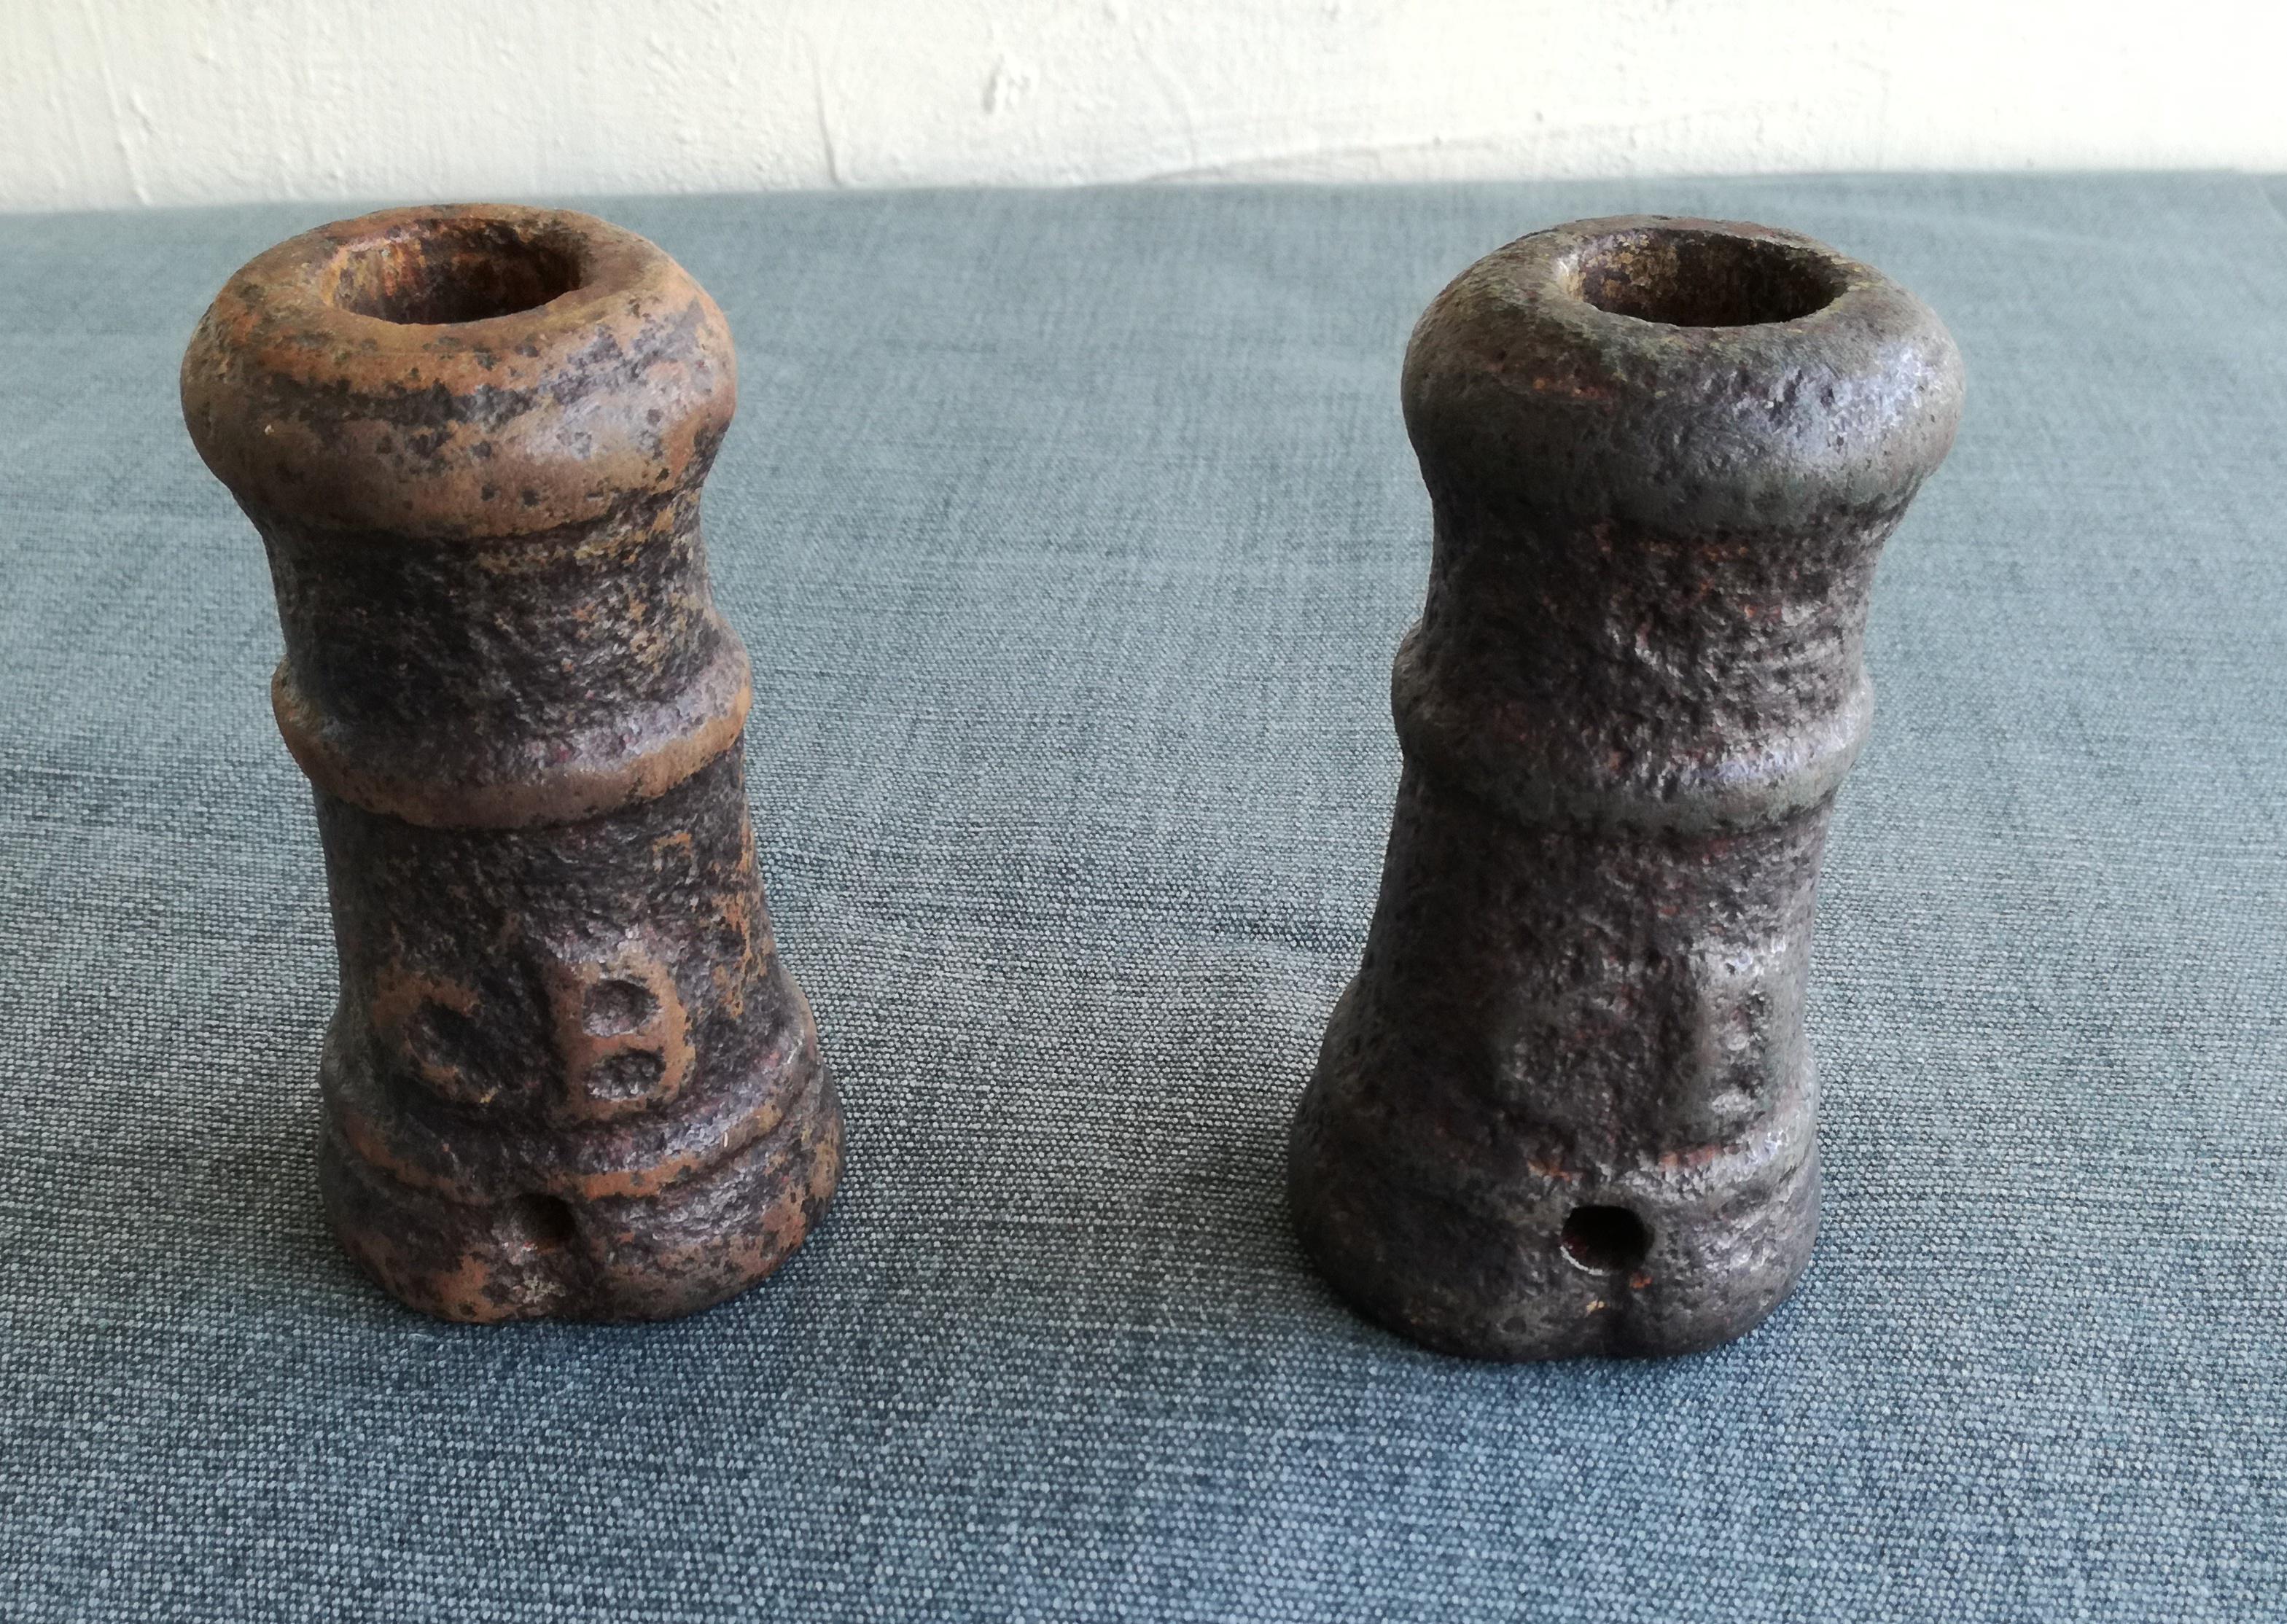 pair of ,antique Mortar ,cheer masculine, fuse. (bombard) made of cast heavy metal. it was used to fire rudimentary fireworks in military parades and also as a test for gunpowder. good, working condition. French Revolution period.